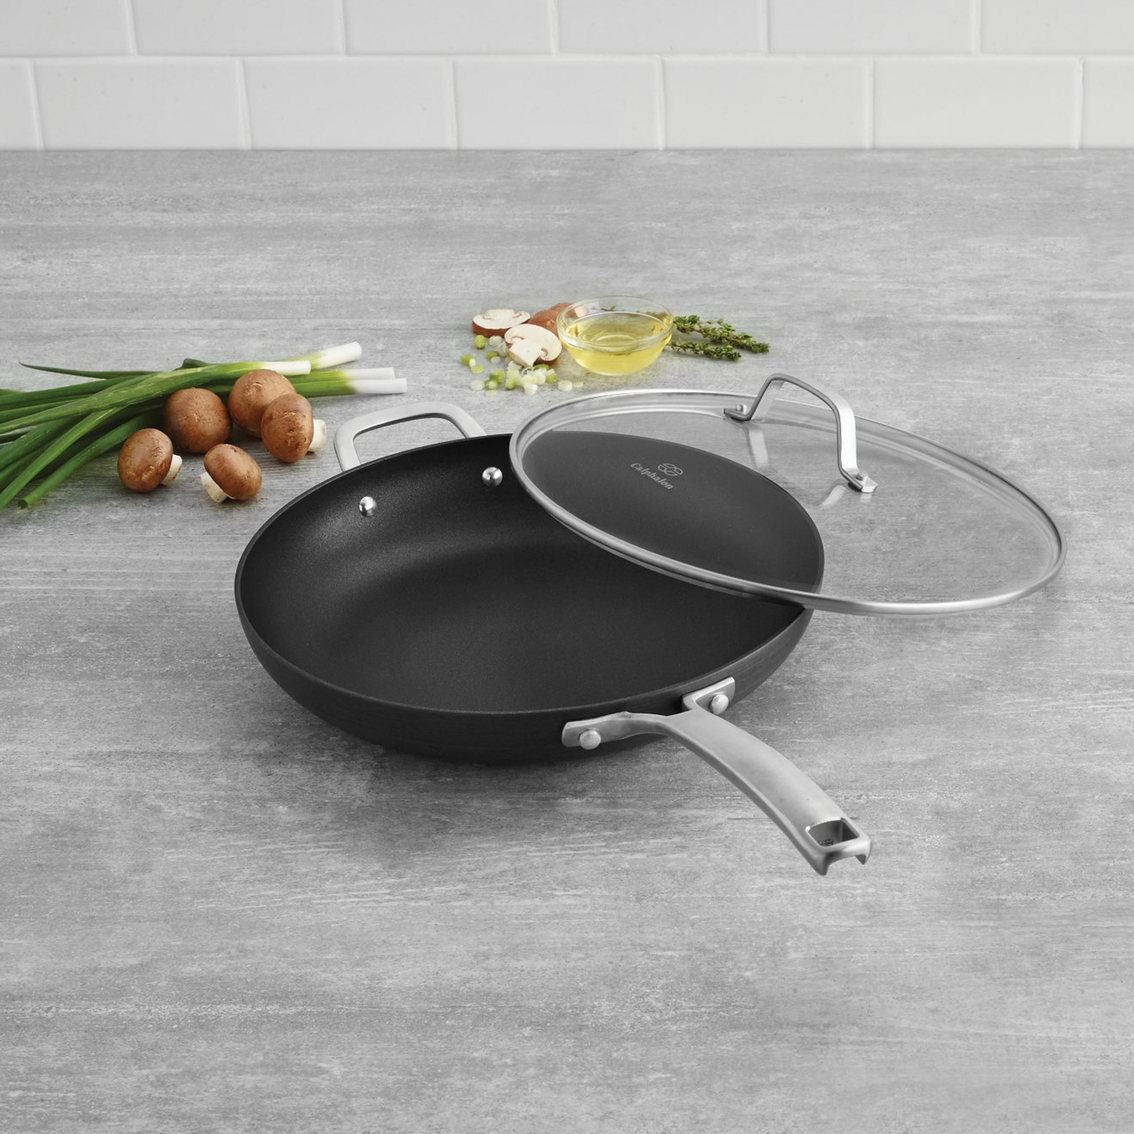 Calphalon Classic Nonstick 12 in. Fry Pan with Cover - Image 2 of 2